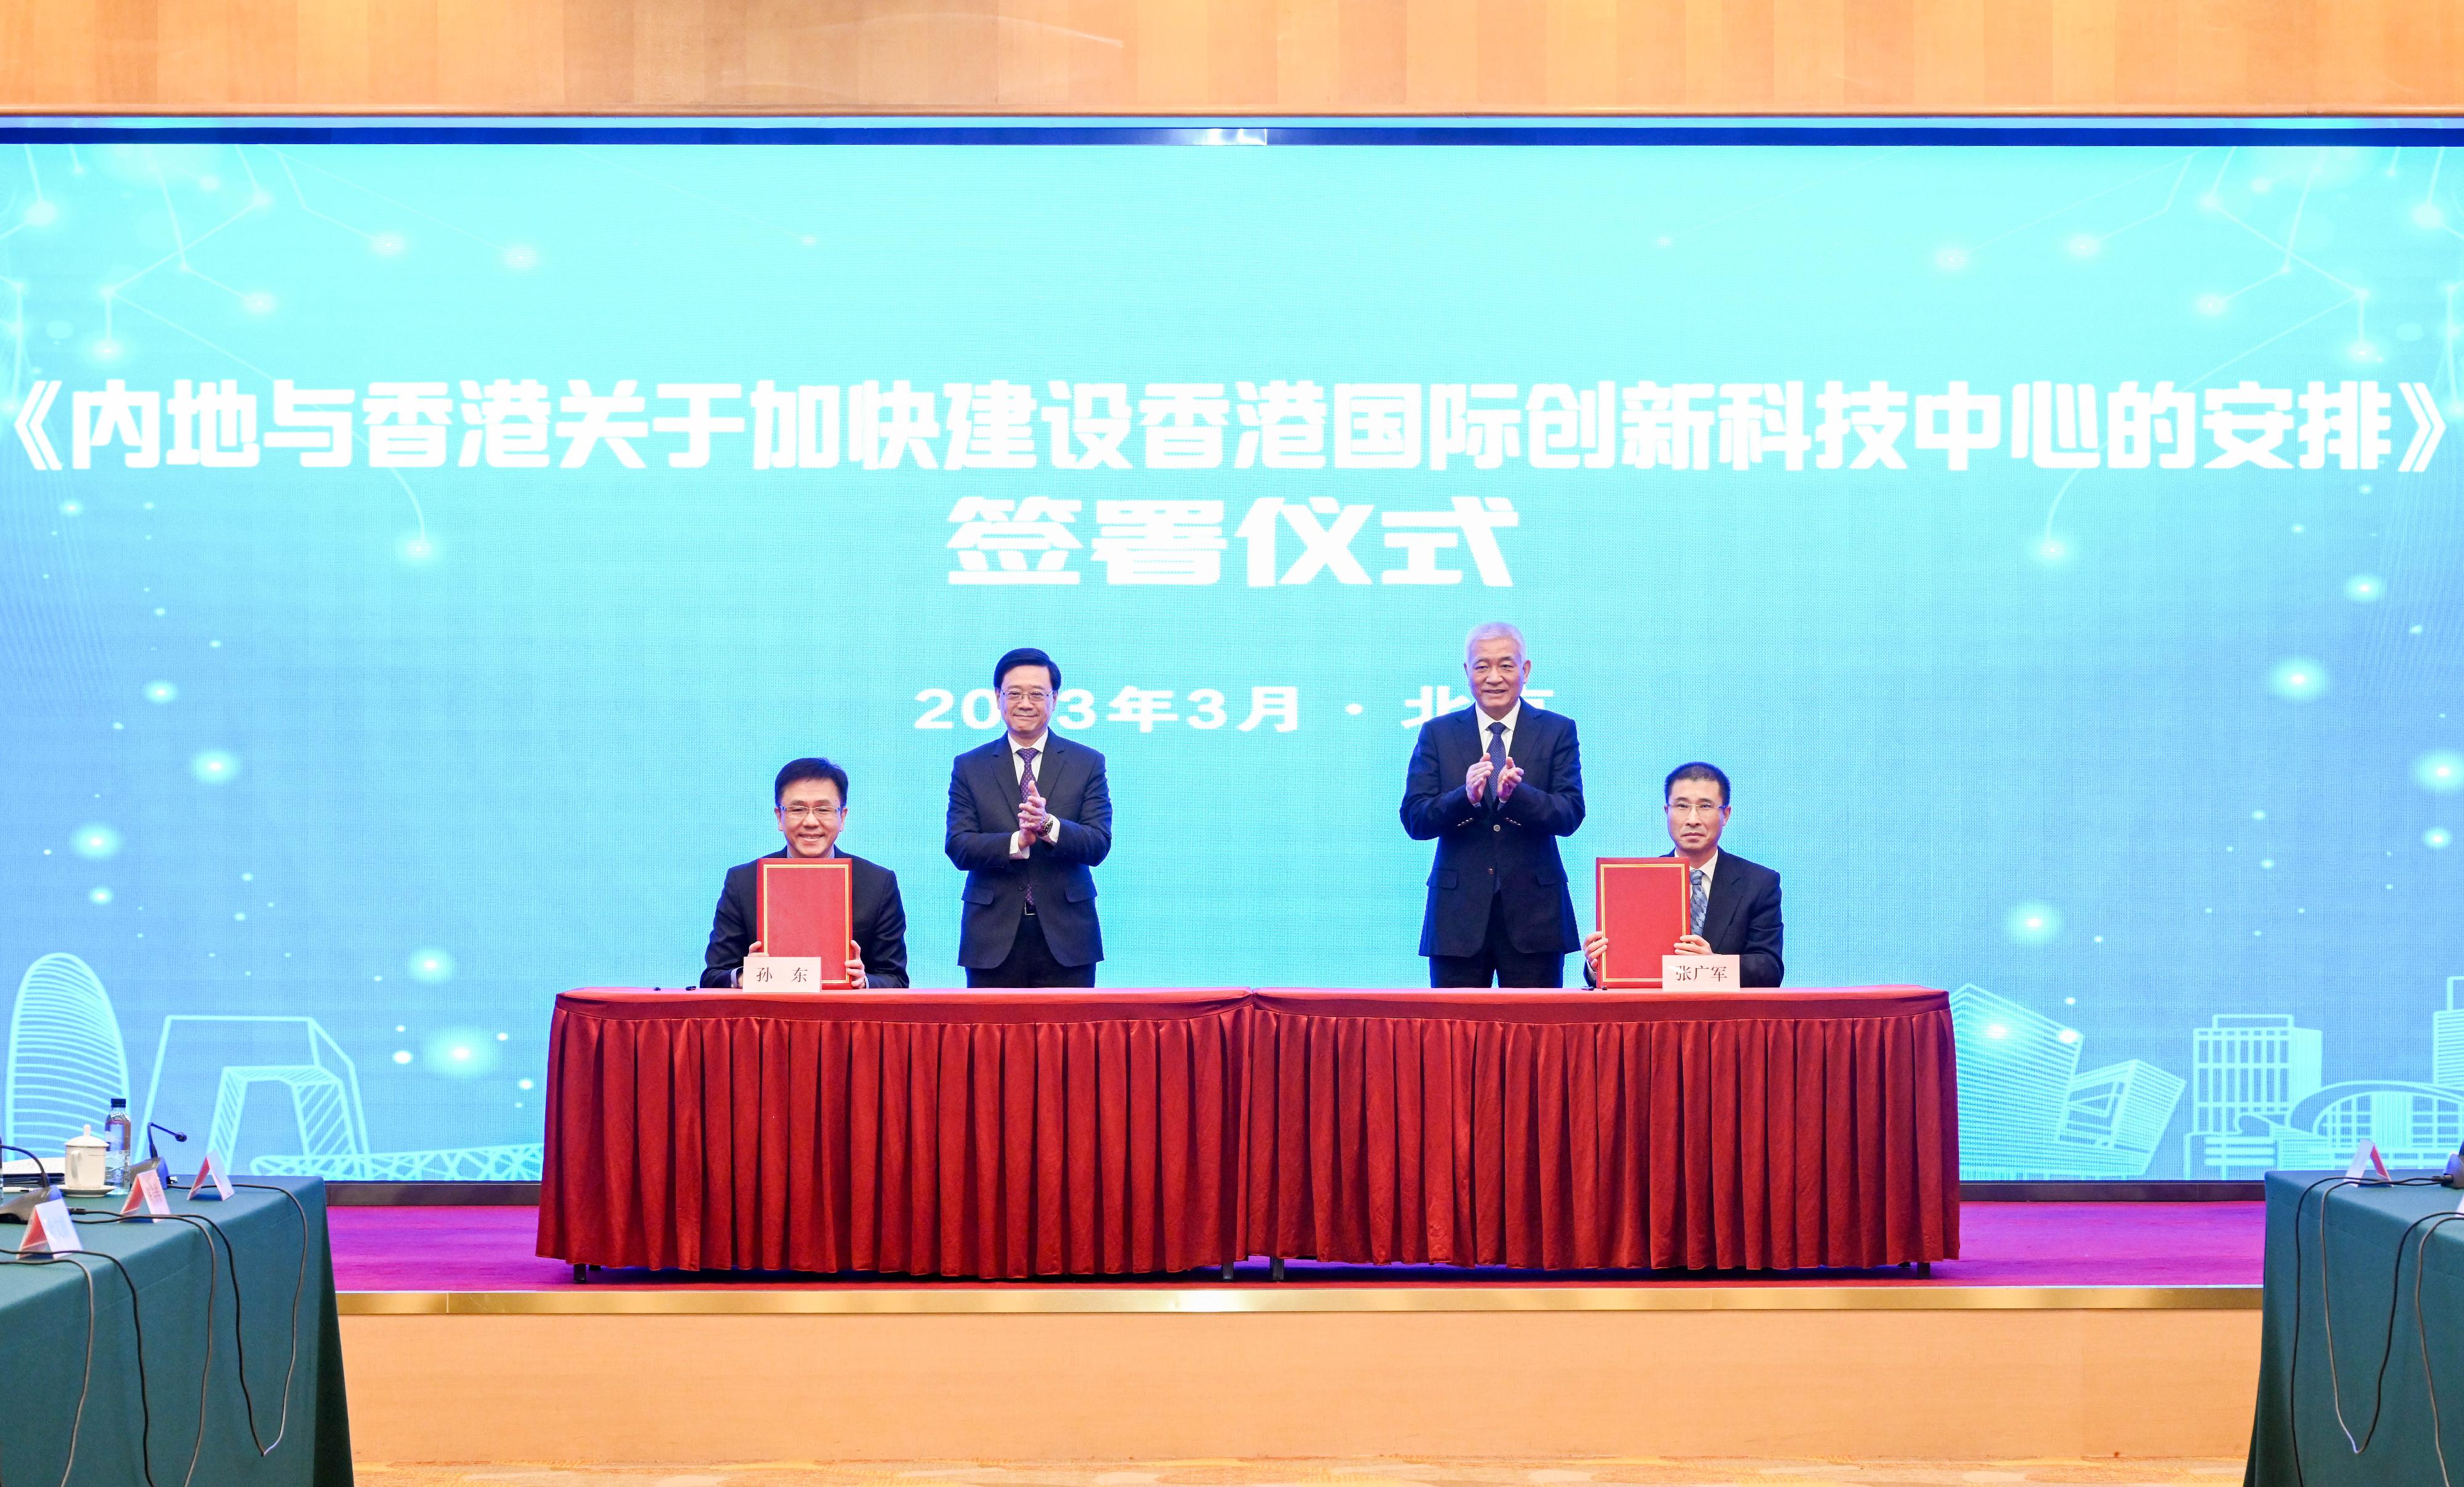 The Secretary for Innovation, Technology and Industry, Professor Sun Dong (front row, left), signed the "Arrangement between the Mainland and Hong Kong on Expediting the Development of Hong Kong into an International Innovation and Technology Centre" with Vice Minister of Science and Technology Professor Zhang Guangjun (front row, right) in Beijing today (March 15). The Chief Executive, Mr John Lee (back row, left) and the Minister of Science and Technology, Mr Wang Zhigang (back row, right), were present to witness the signing.